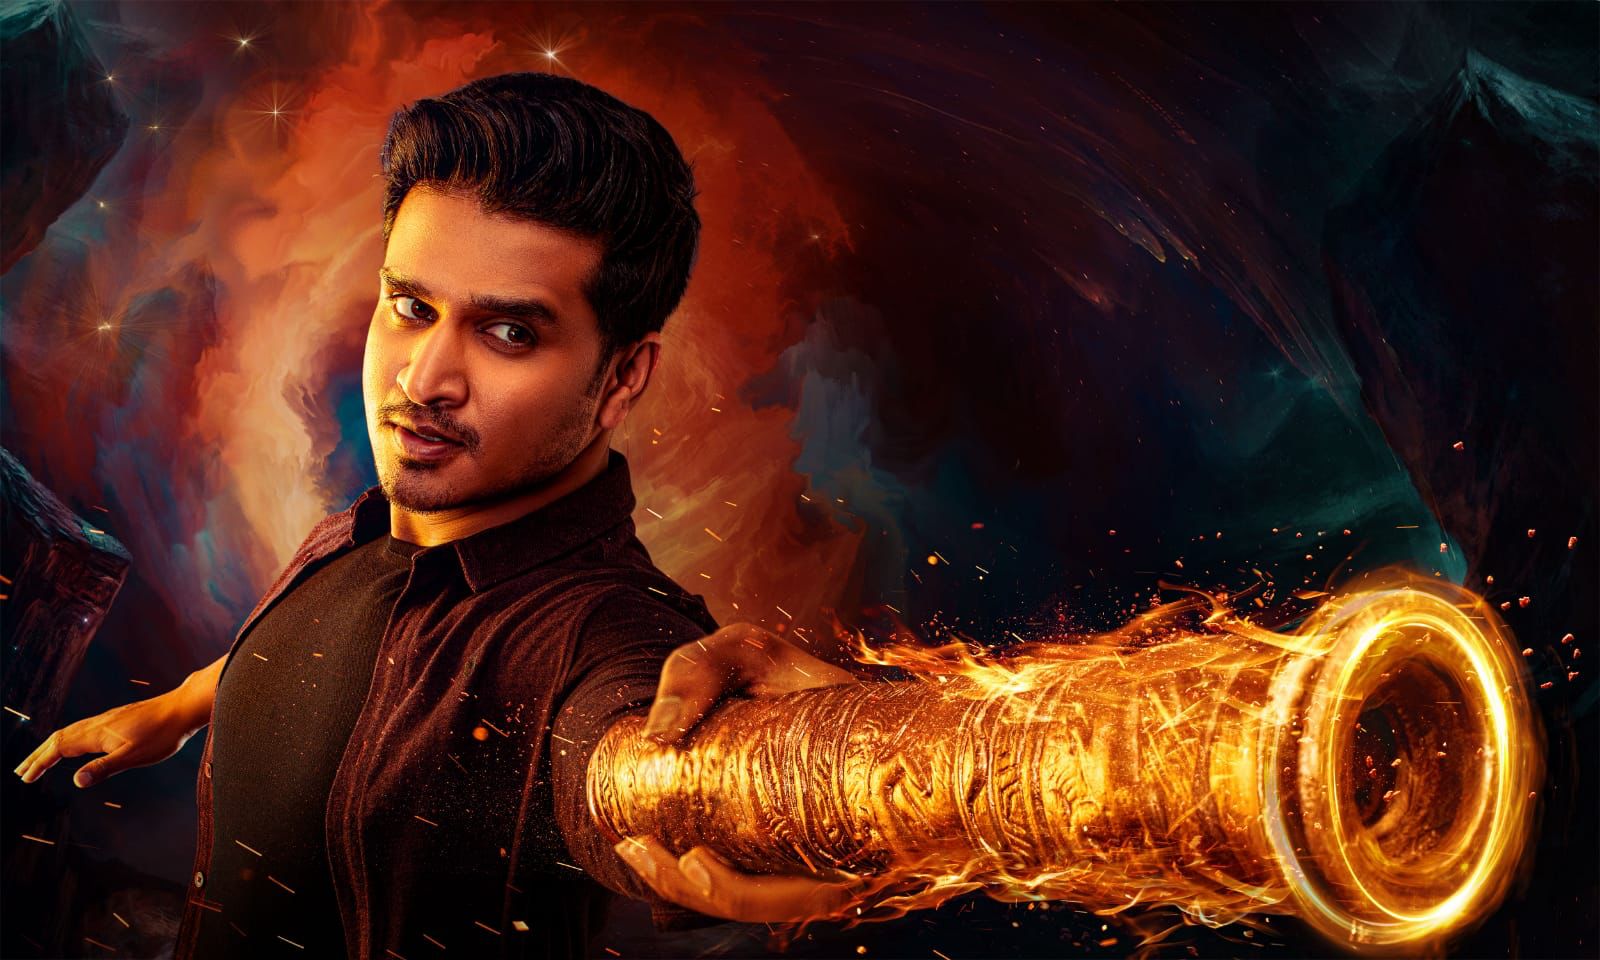 Karthikeya 2 seems to have swept the audiences off their feet with a gripping plot and story line!